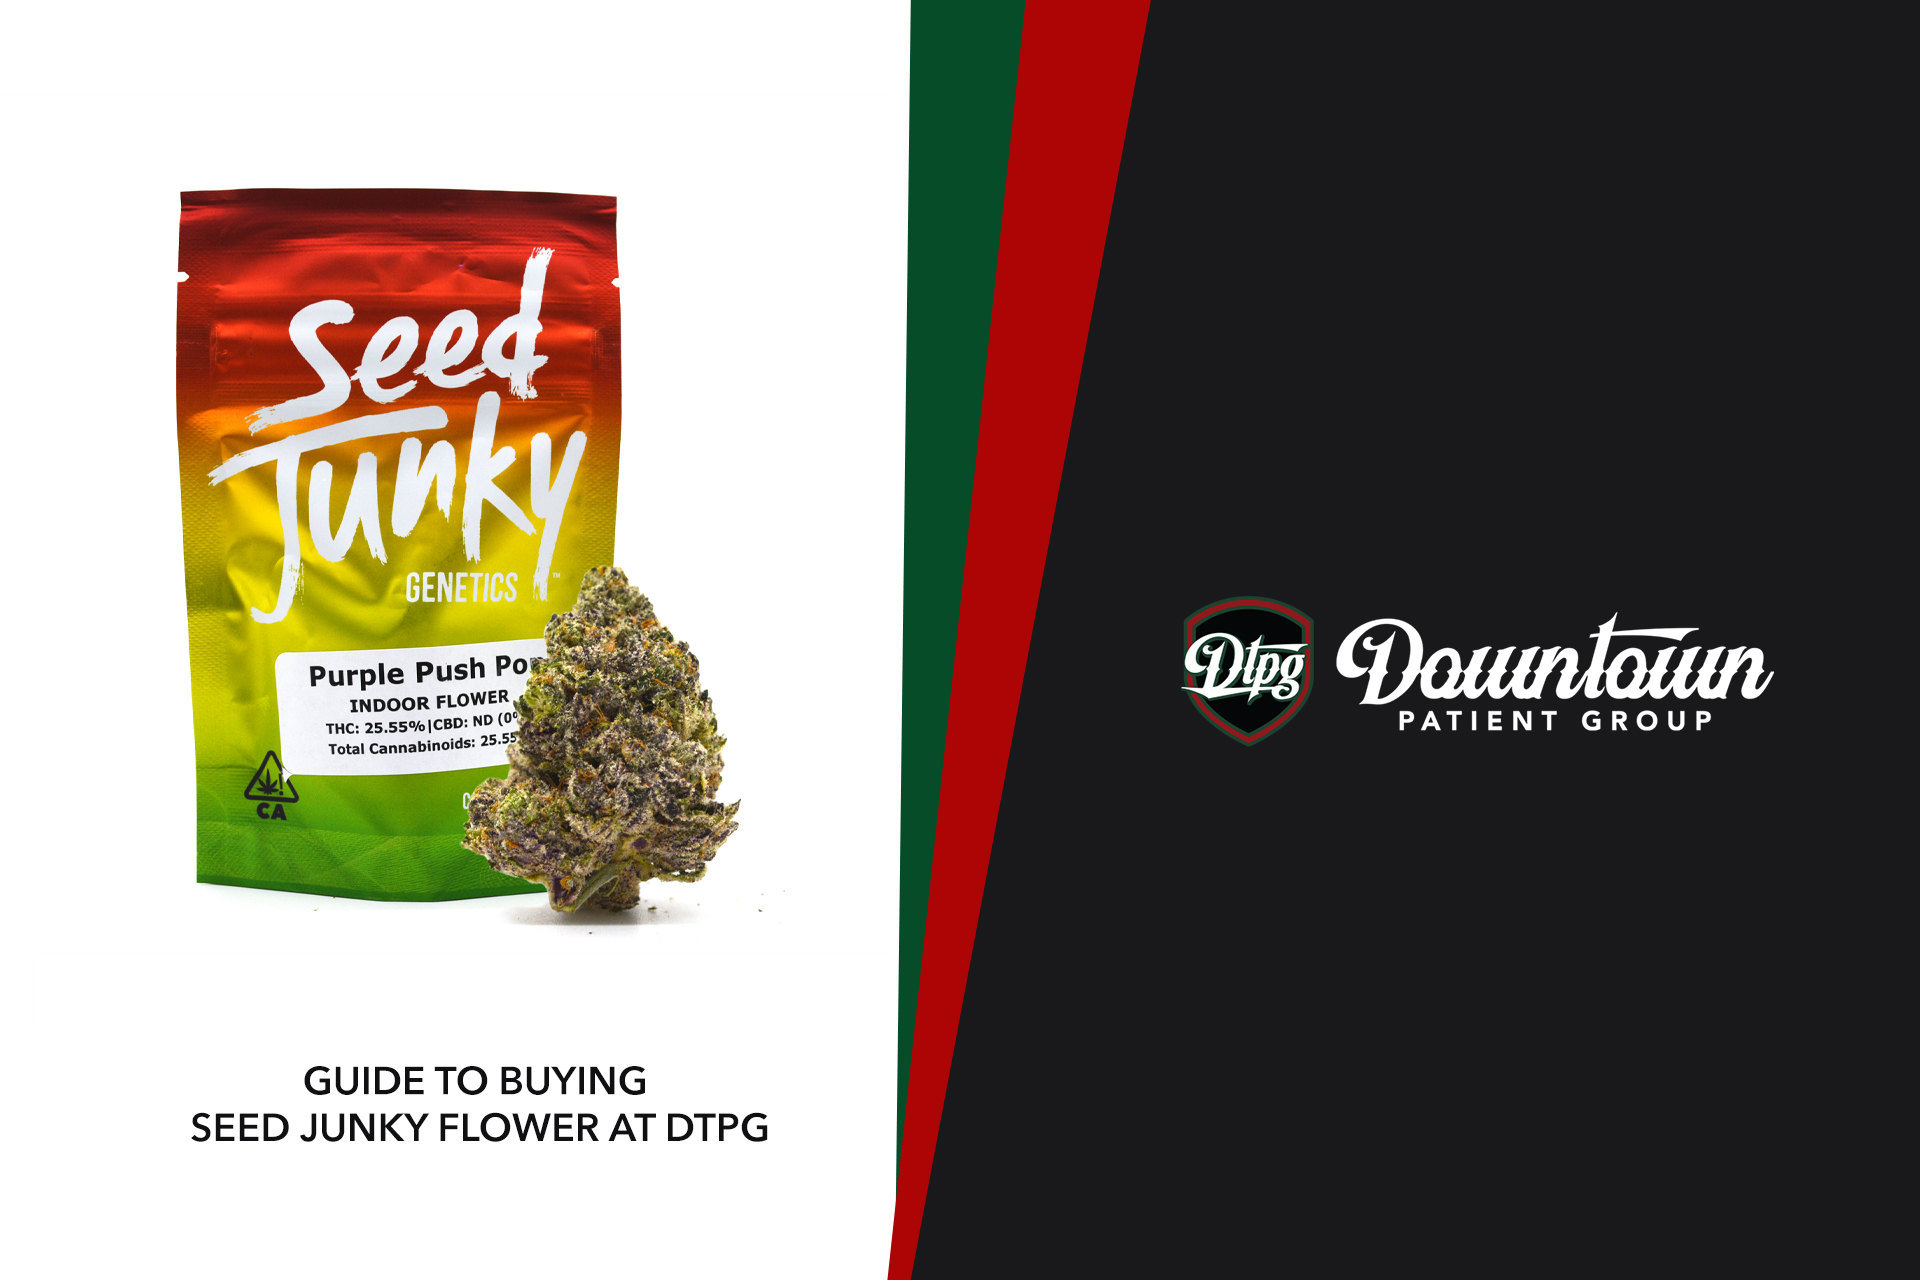 Seed Junky Genetics Guide: Game-Changing Cannabis Flower at DTPG